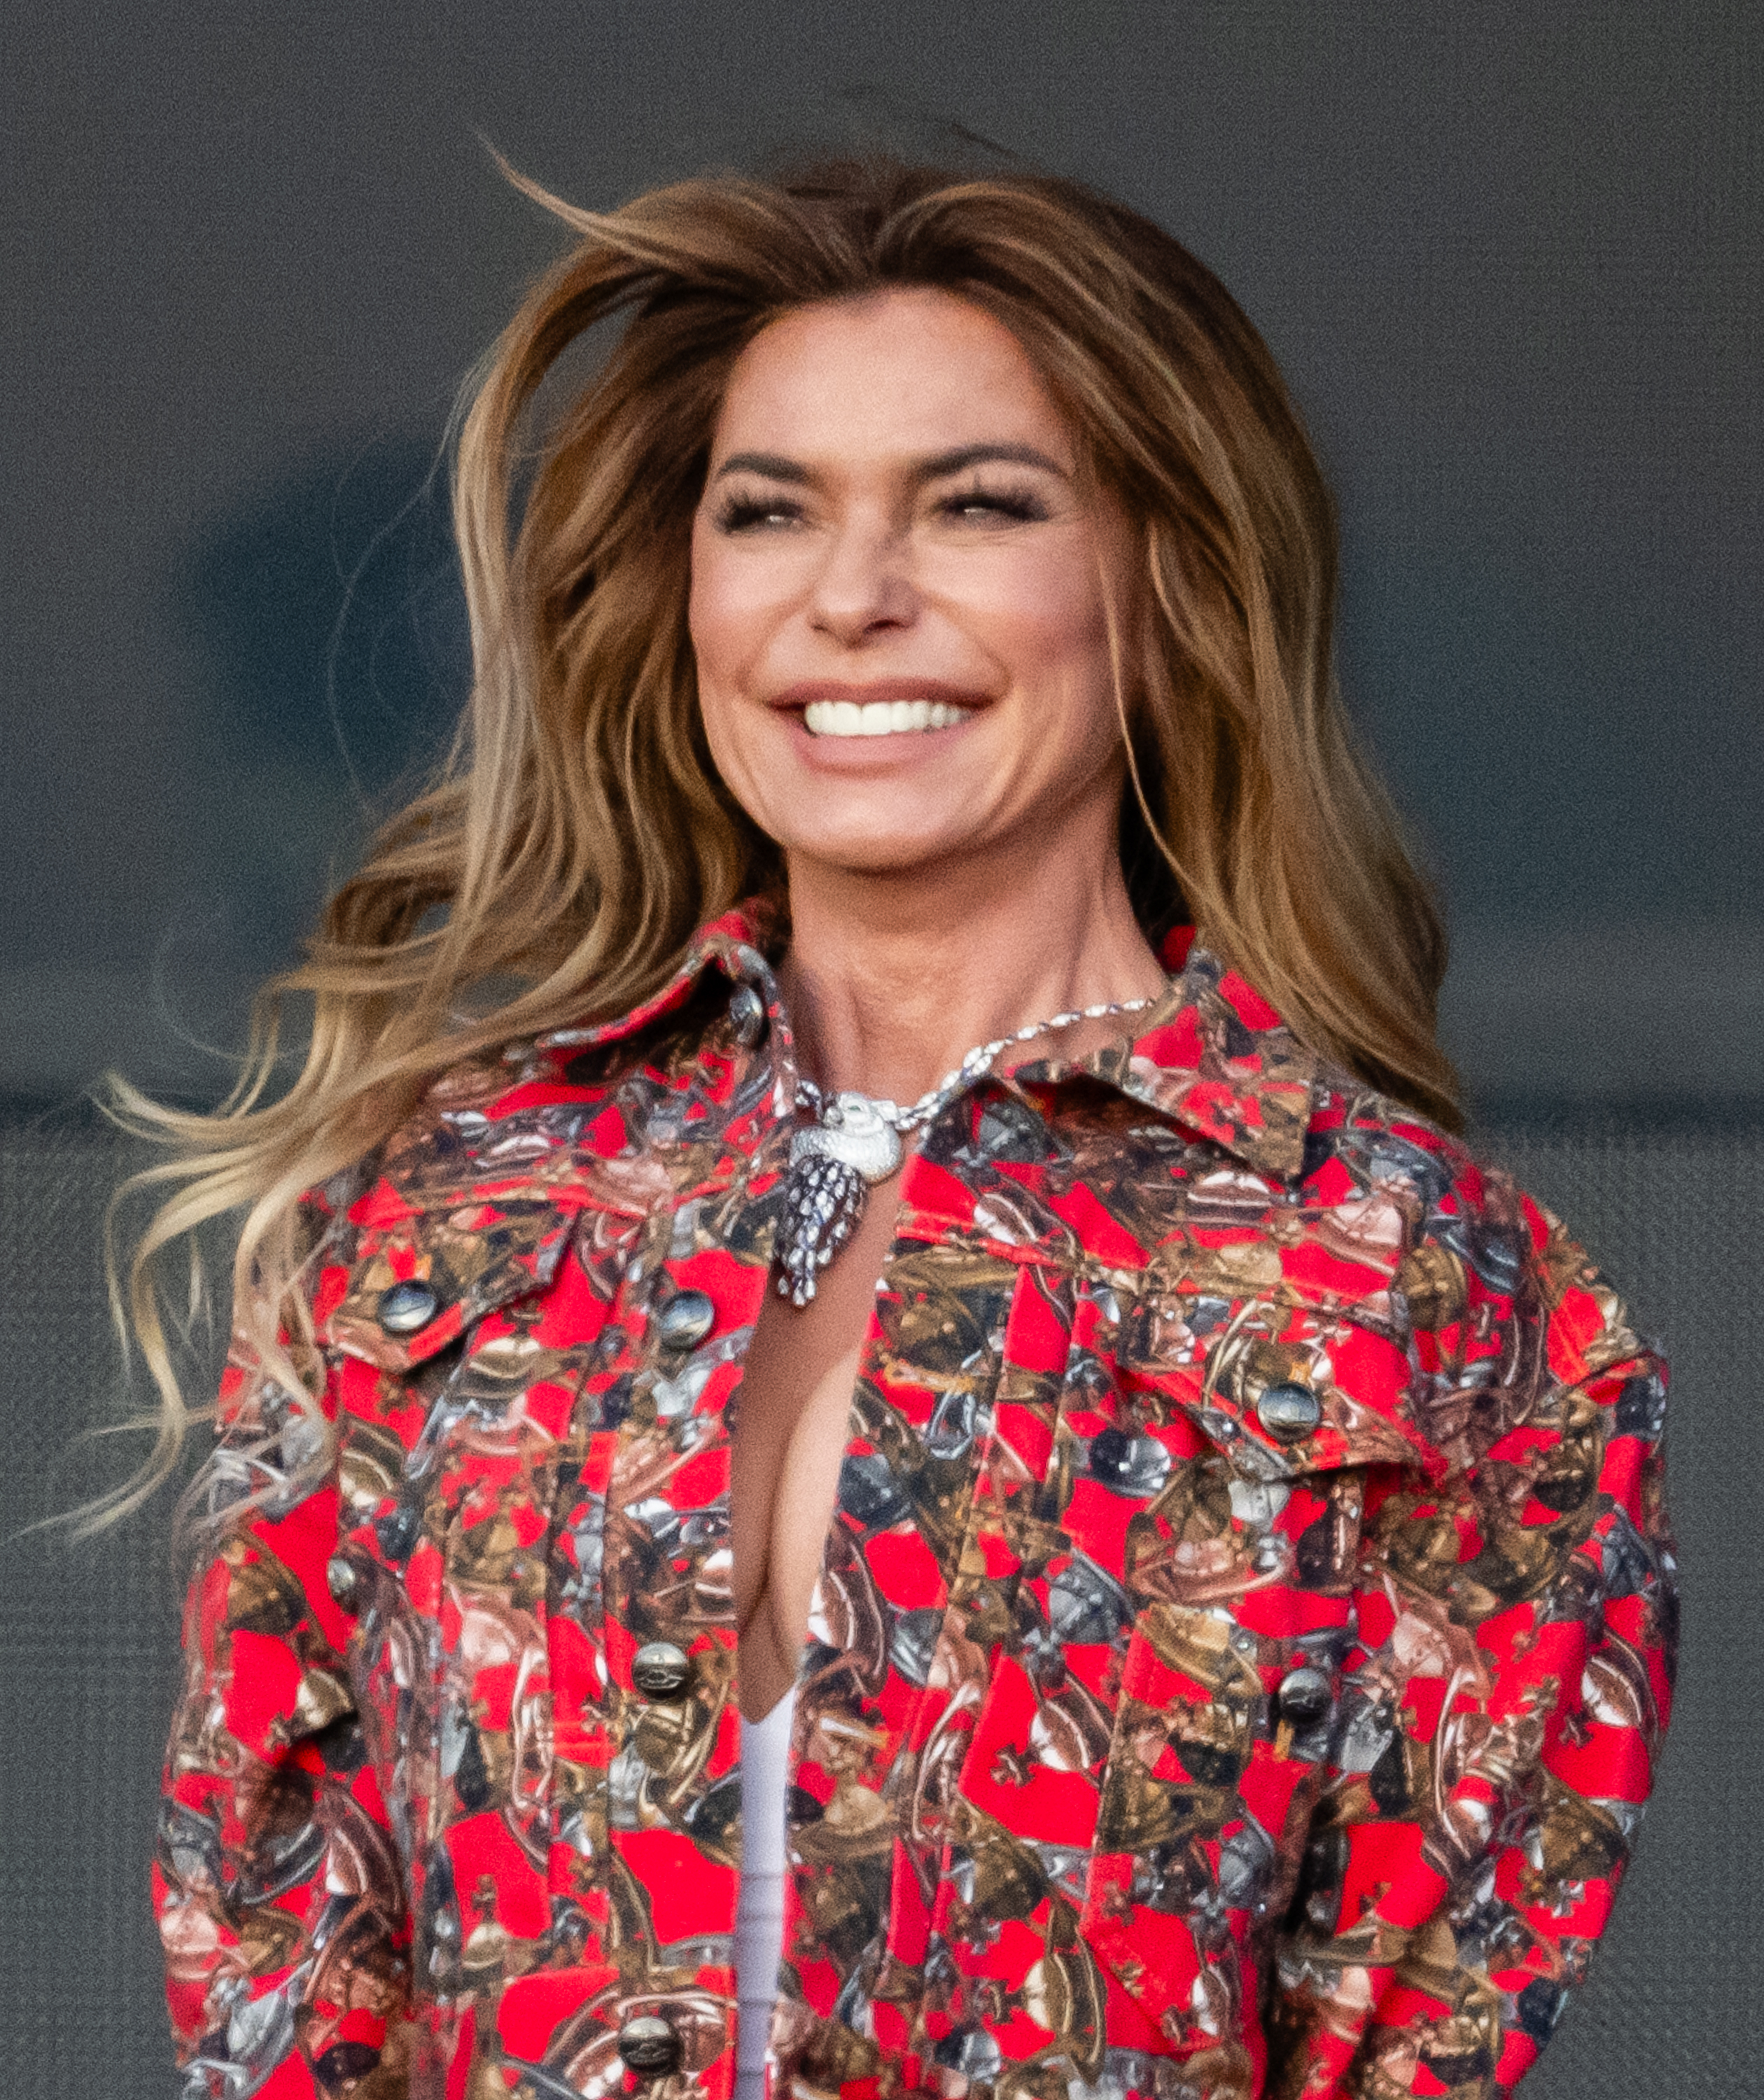 Shania Twain smiling, wearing a patterned jacket with a statement necklace